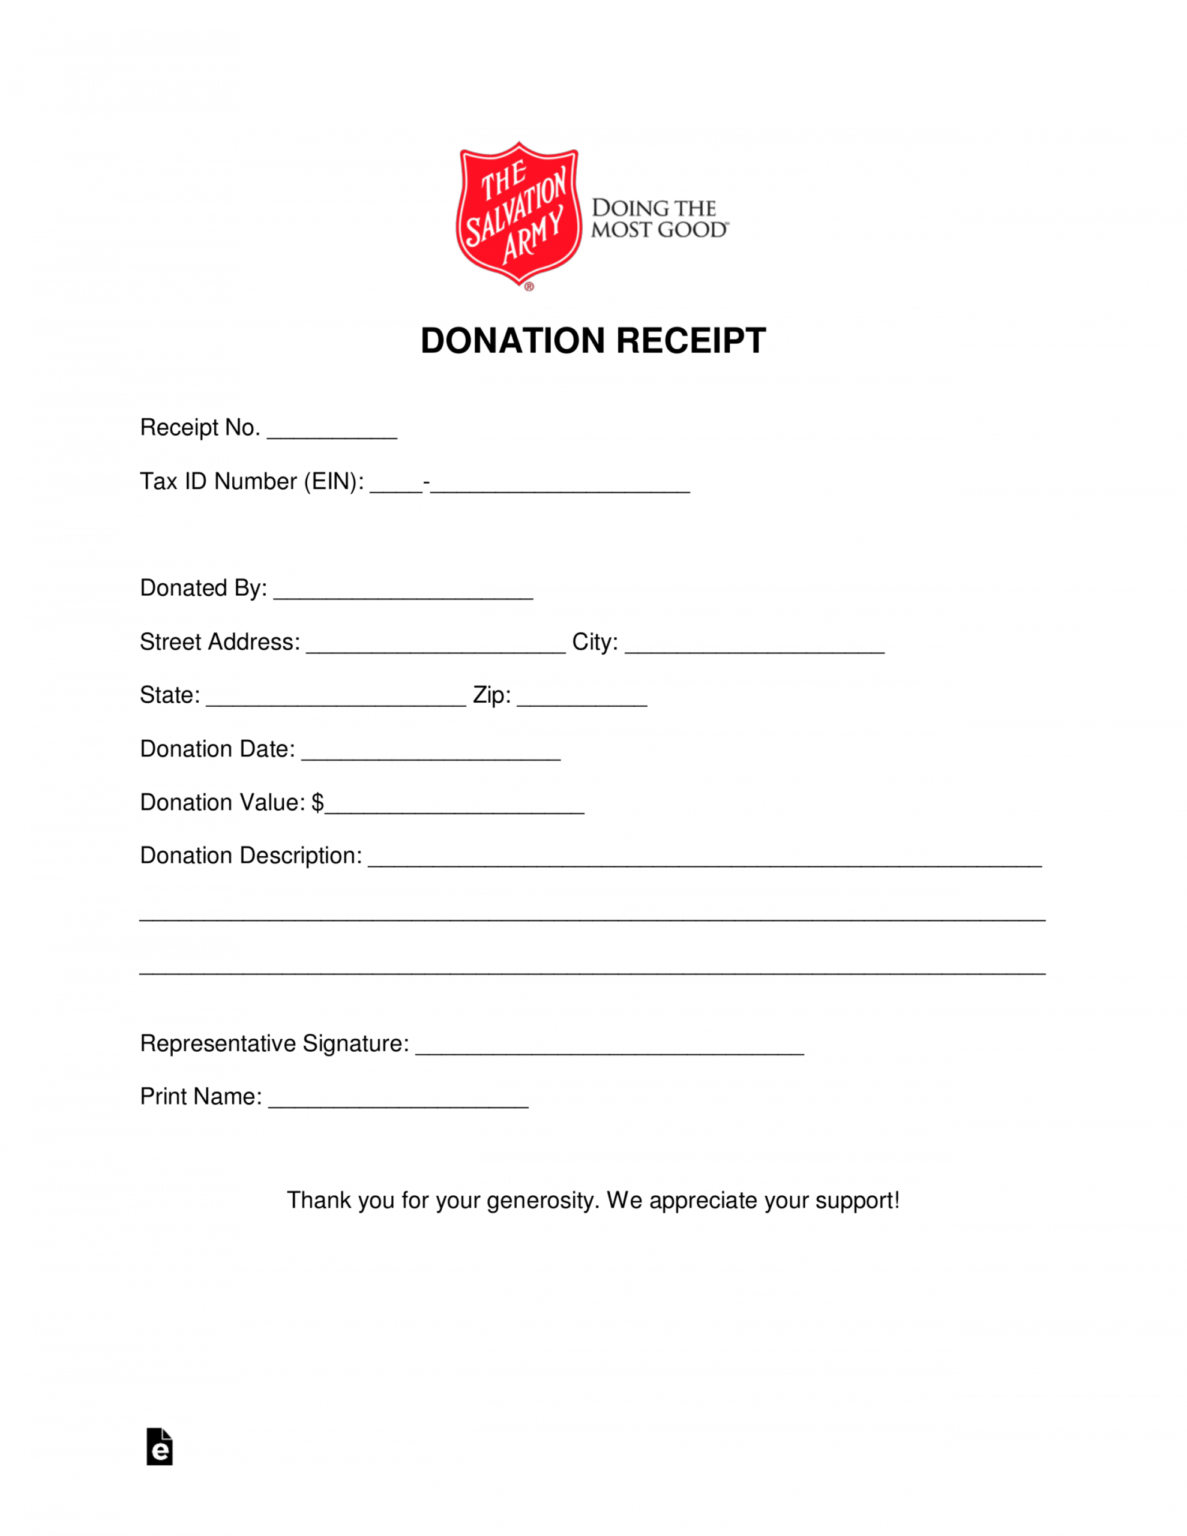 Free Salvation Army Donation Receipt Pdf Word Eforms Thrift Store Donation Receipt Template Sample Scaled 1187x1536 